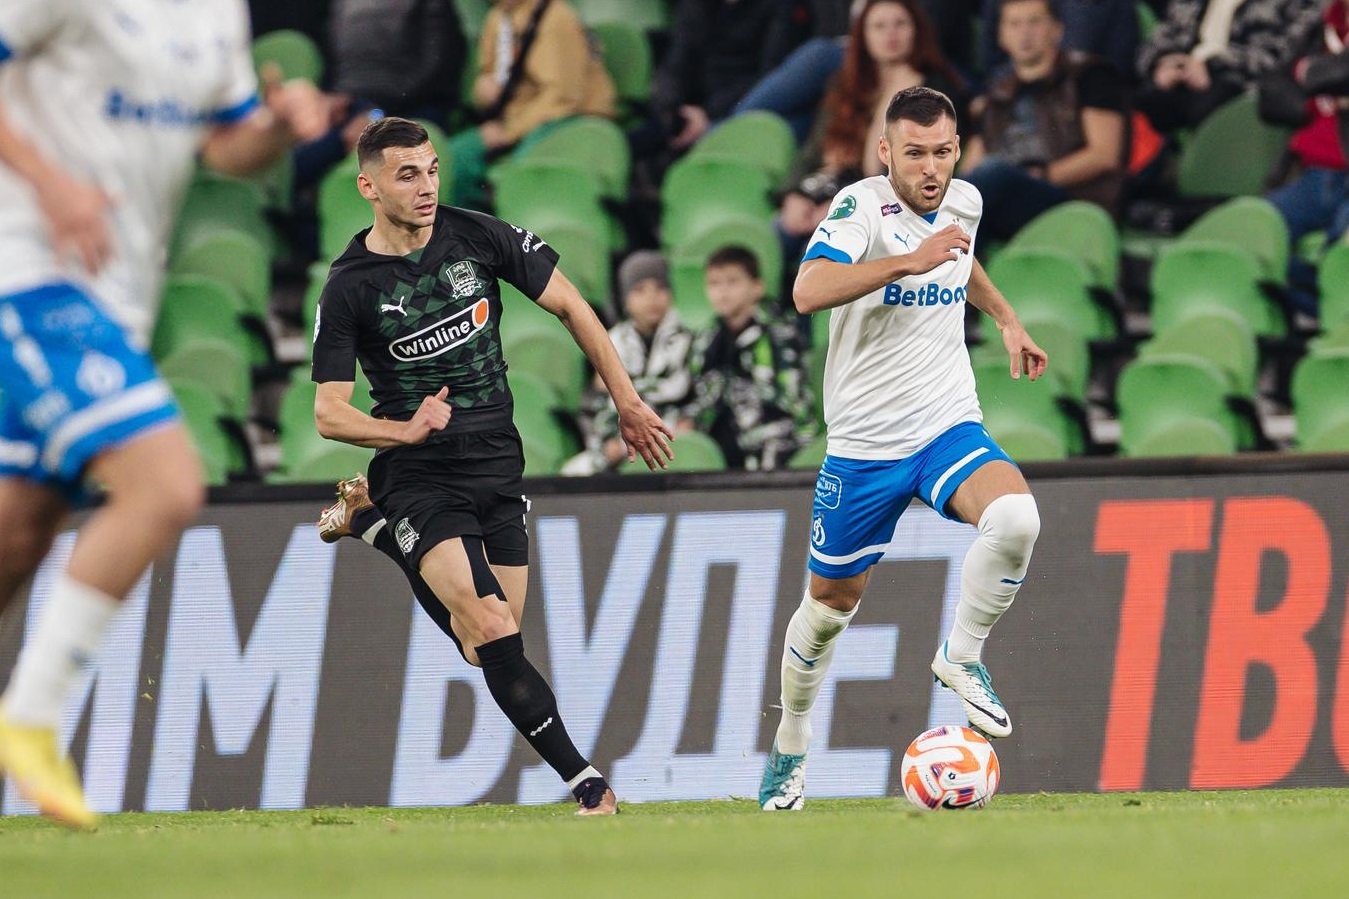 Match Preview: "Krasnodar" vs "Dynamo": Where to Watch, Our News, All About the Opponent